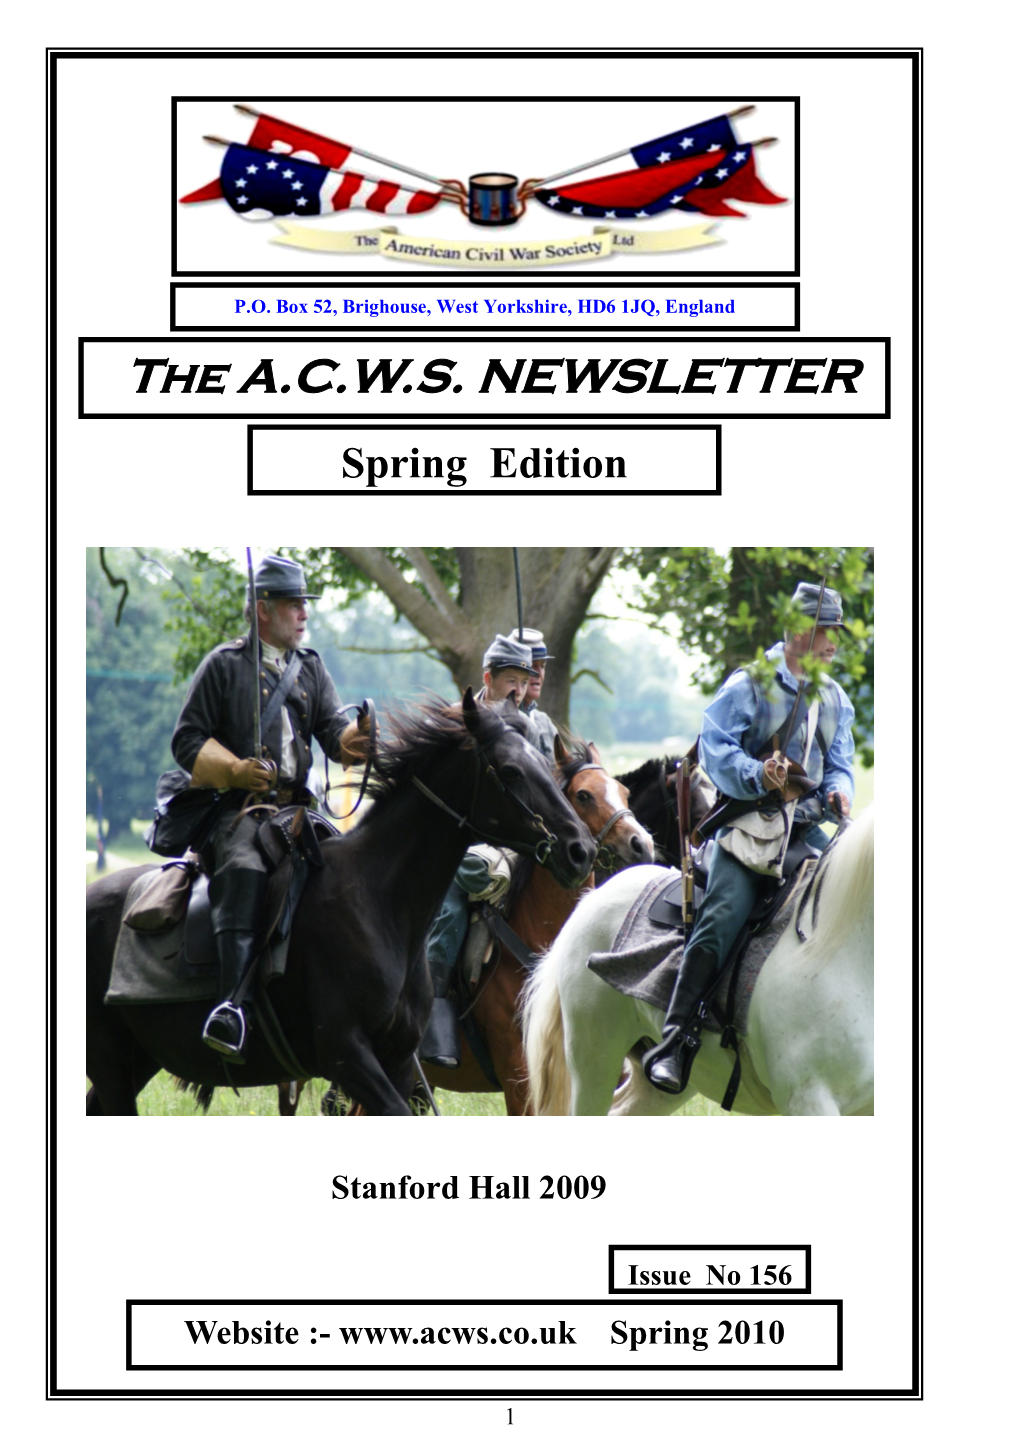 The A.C.W.S. NEWSLETTER